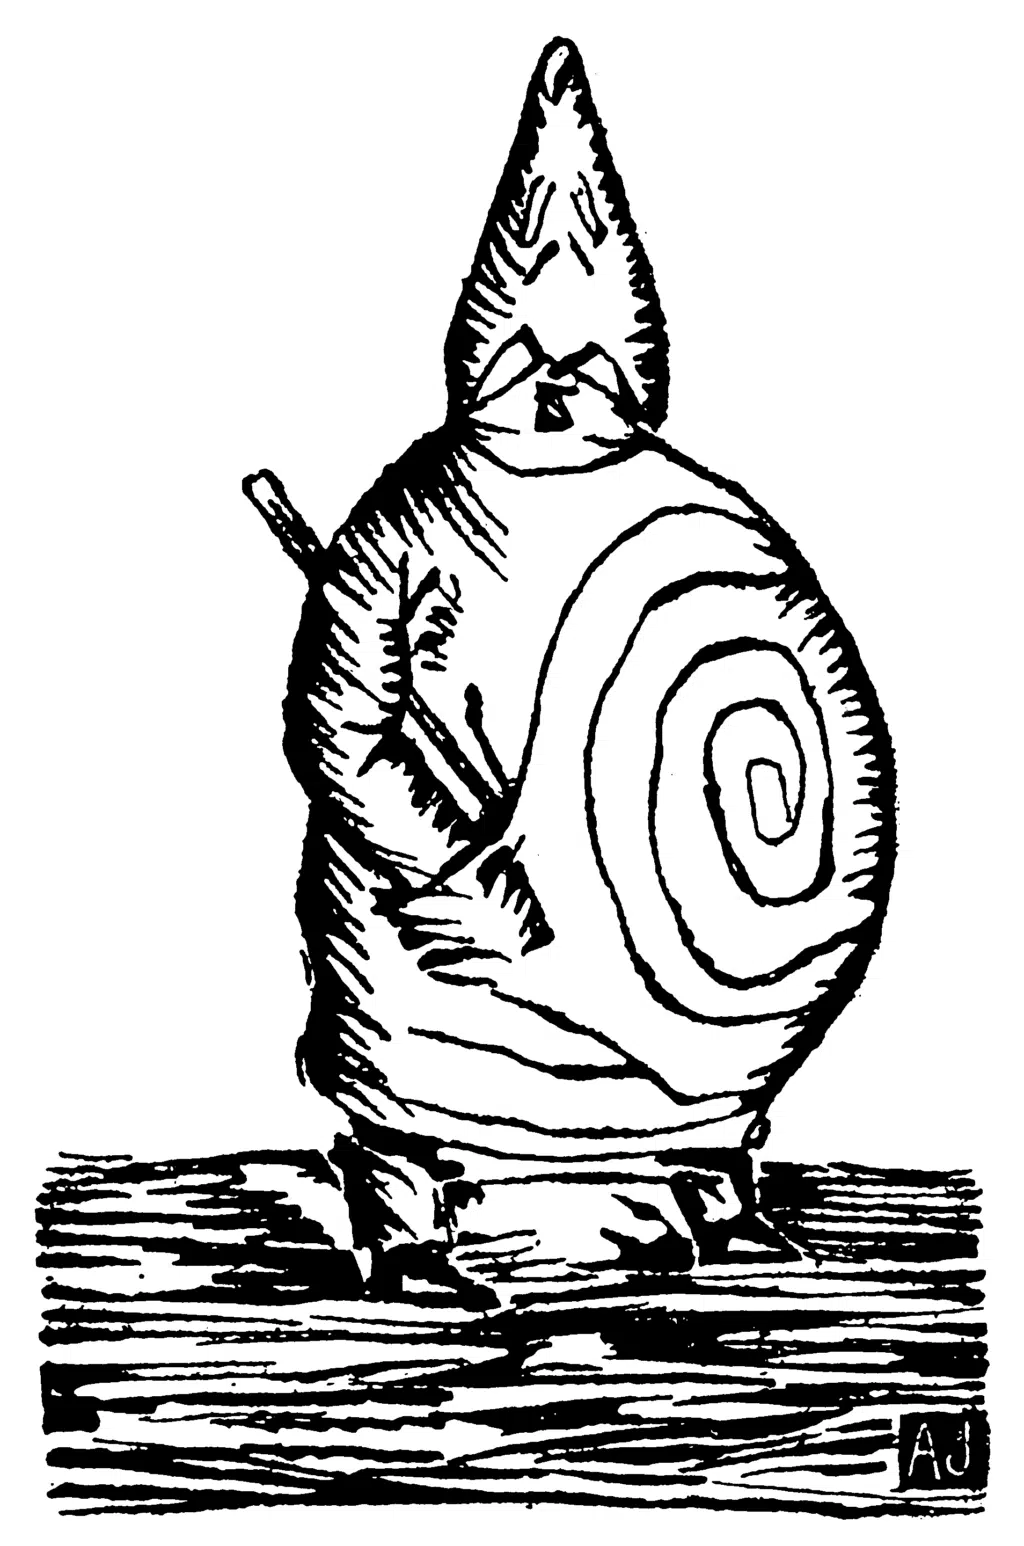 Woodcut print in black line portrait of Monsieur Ubu who is a hooded, rounded figure, holding a stick under his arm.